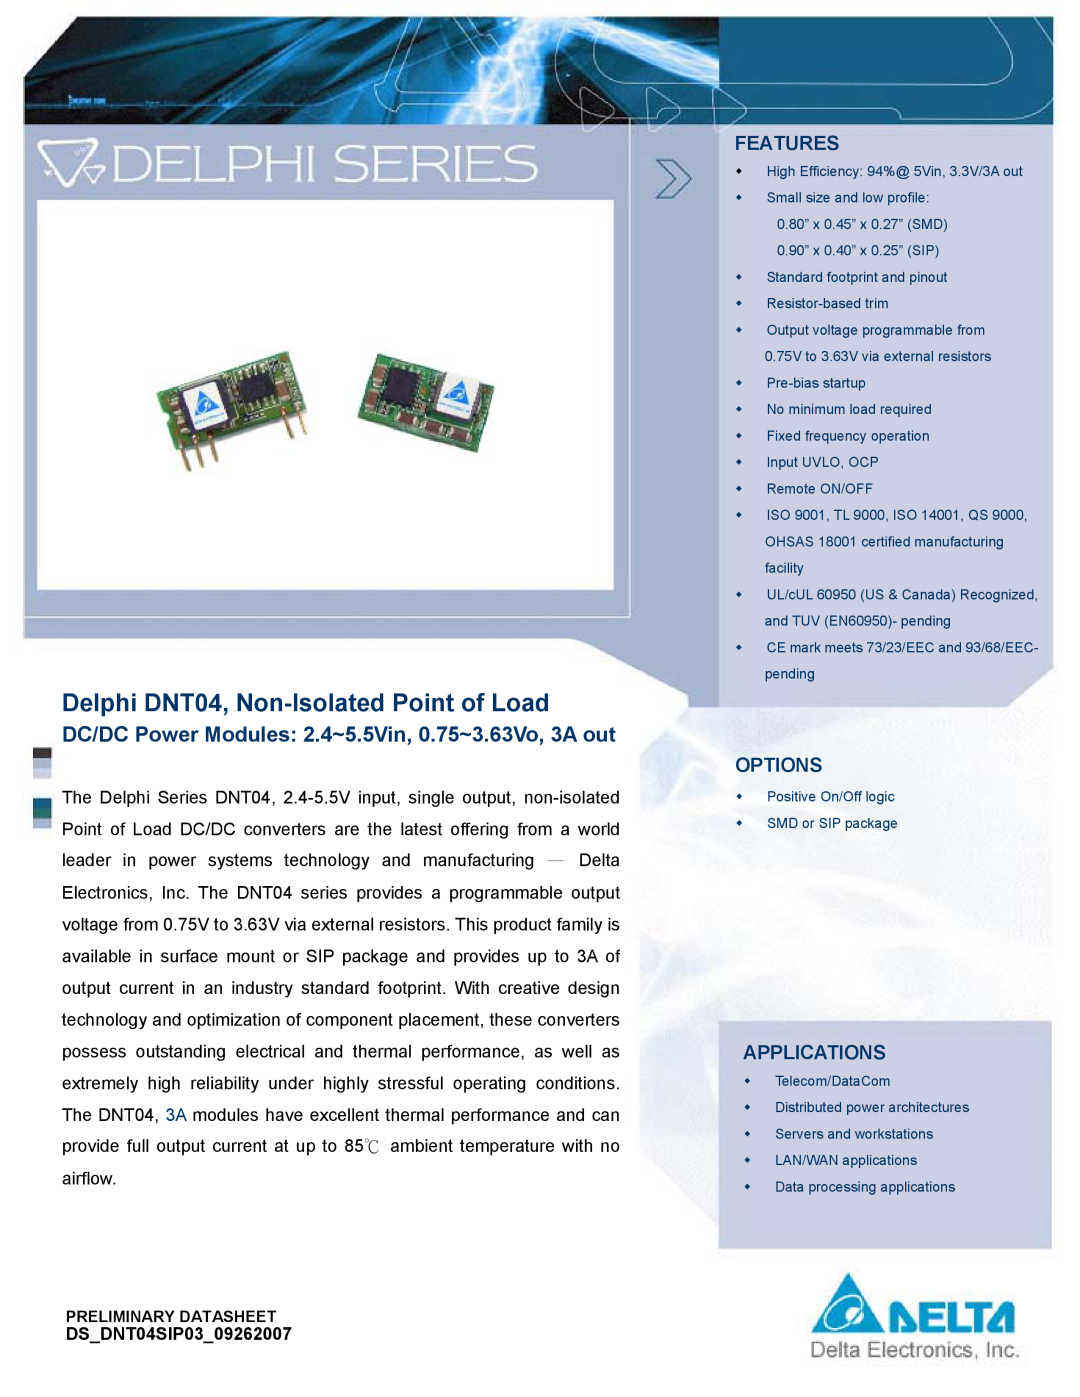 Delta Electronics manual Delphi DNT04, Non-Isolated Point of Load, DC/DC Power Modules 2.4~5.5Vin, 0.75~3.63Vo, 3A out 